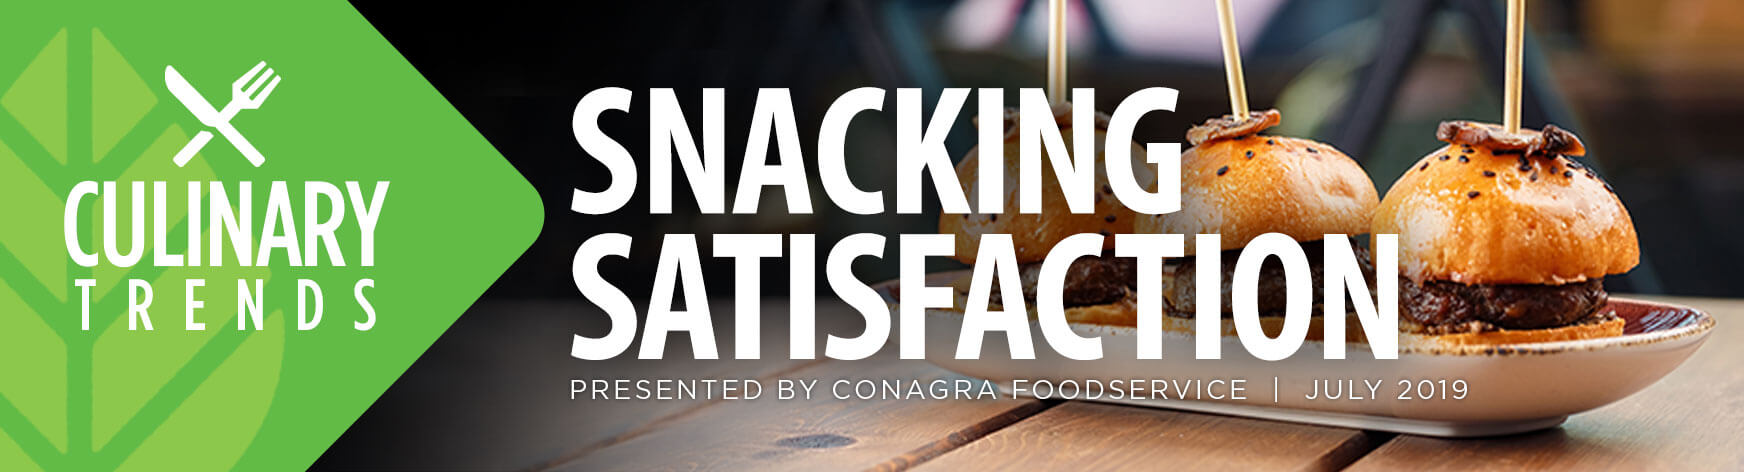 Culinary Trends: Snacking Satisfaction Presented by Conagra Foodservice